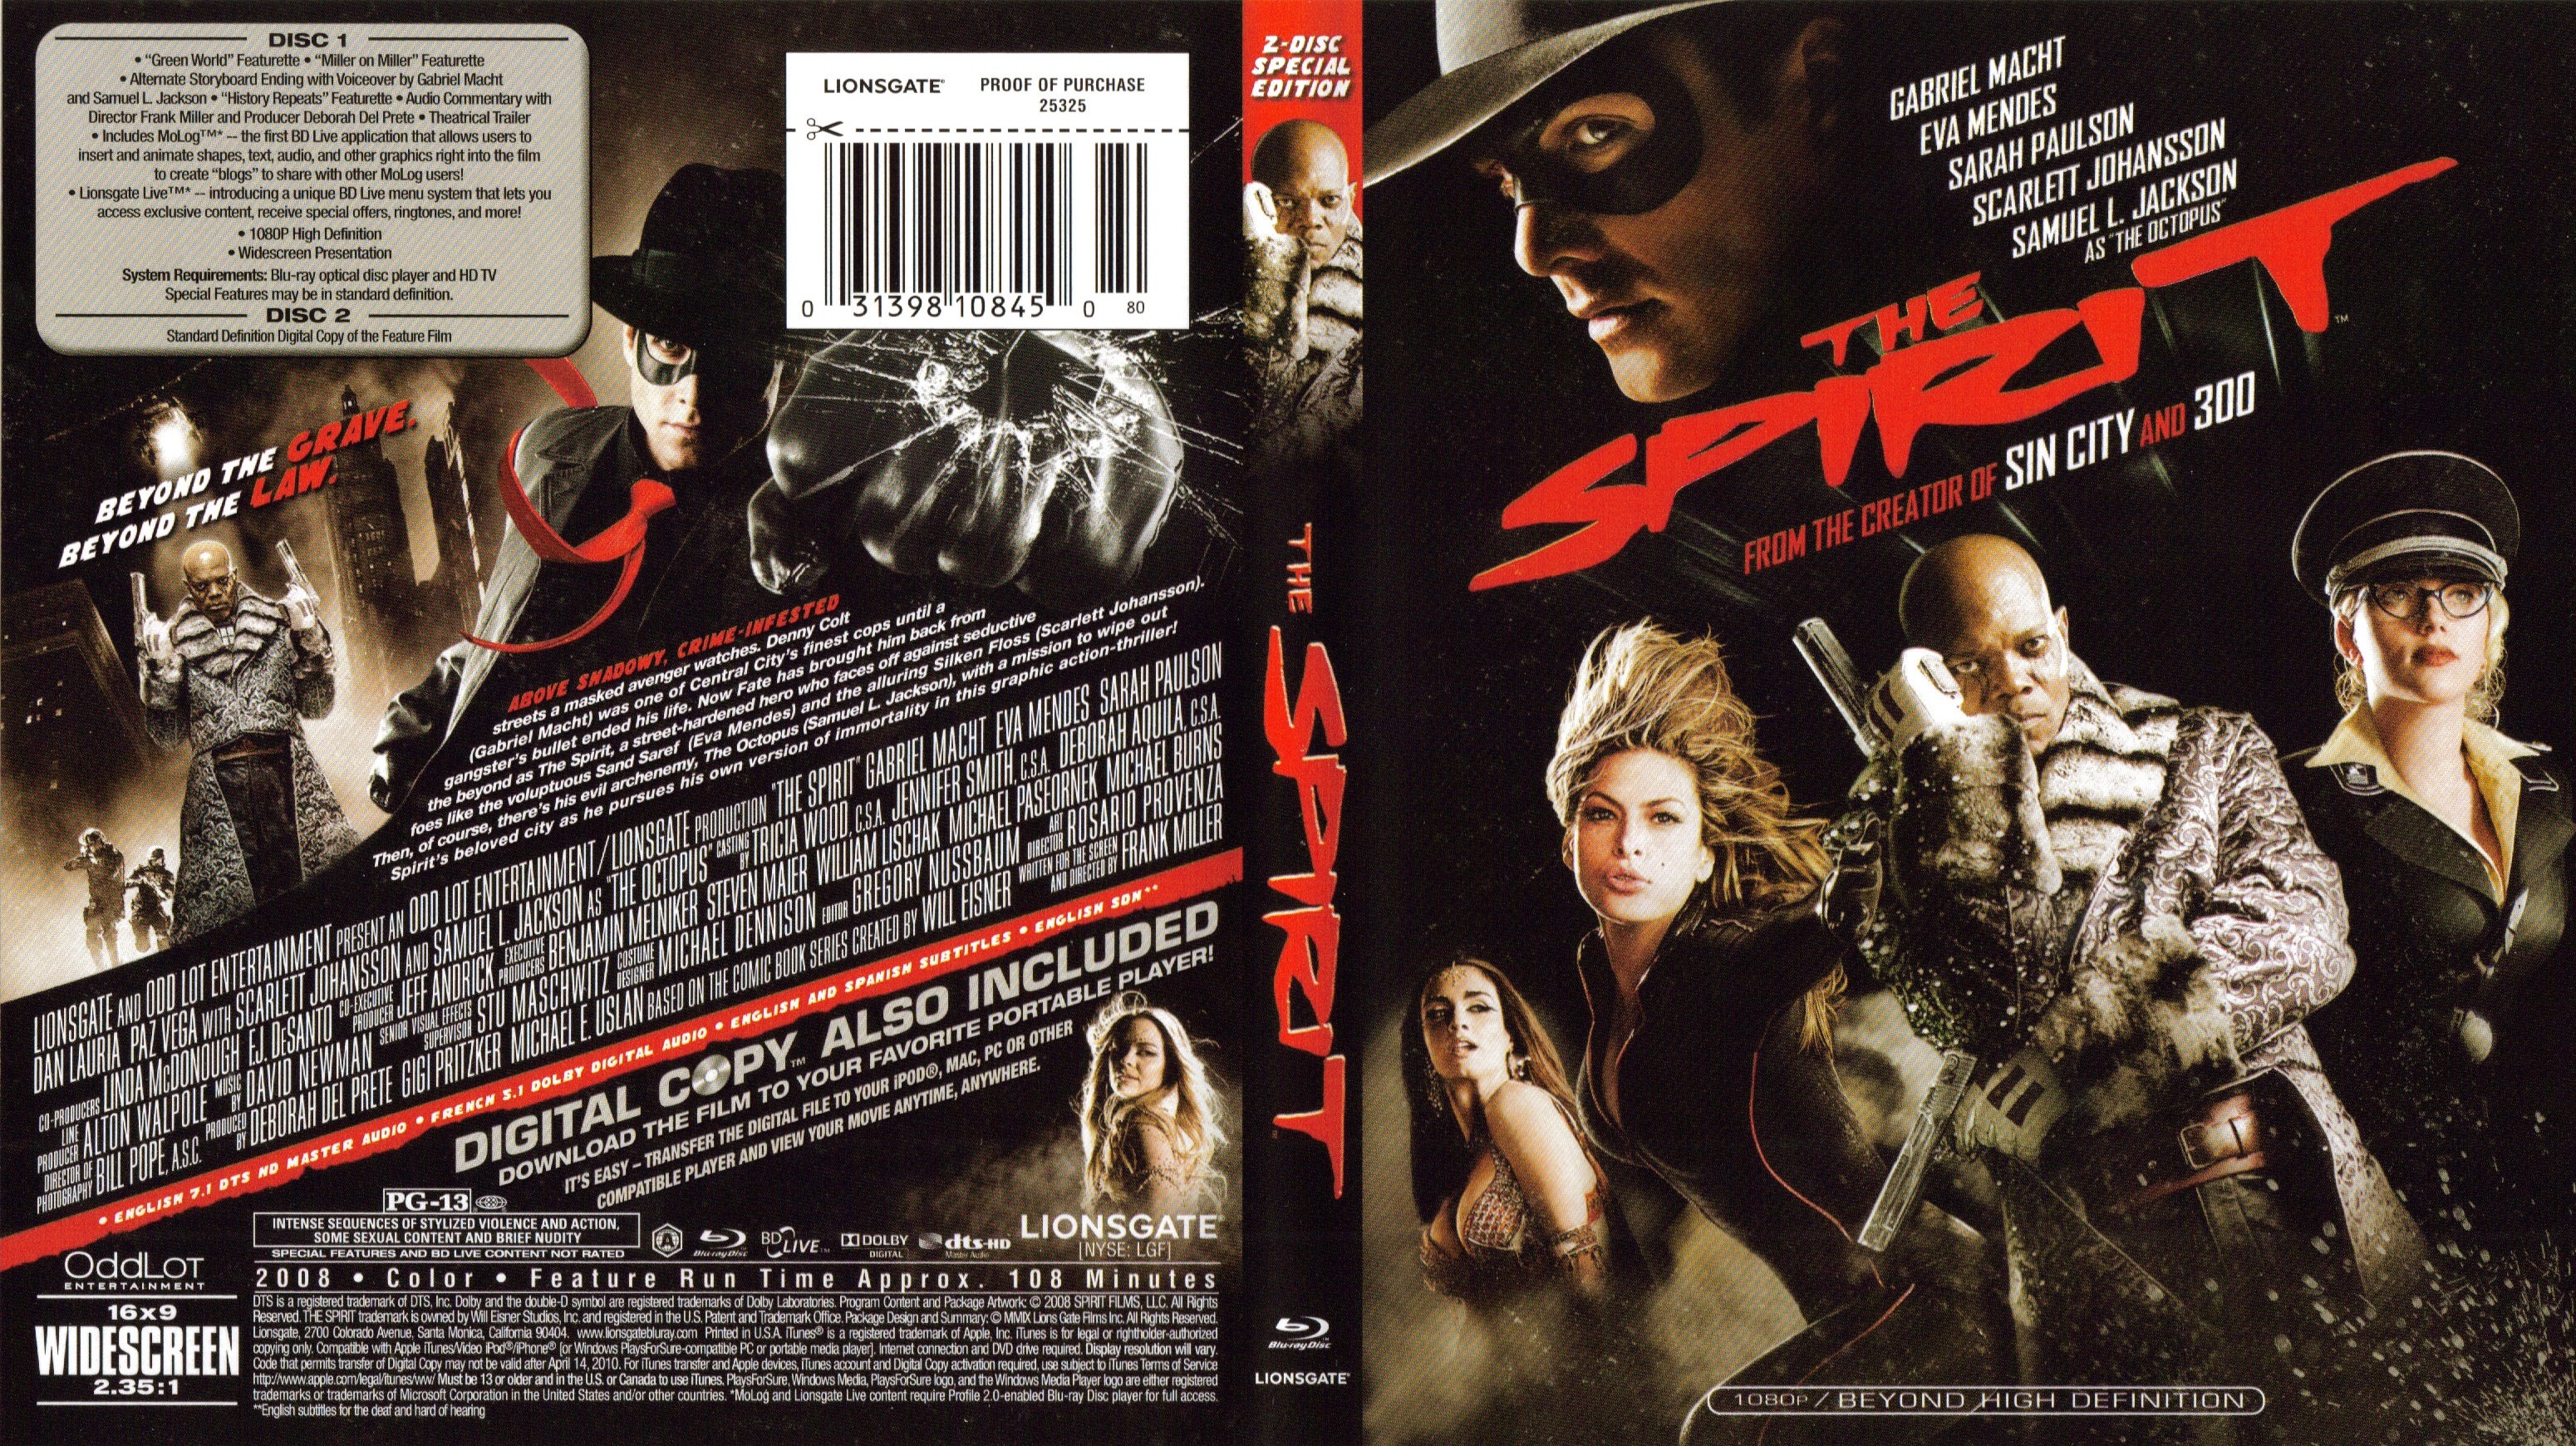 Jaquette DVD The Spirit (Canadienne) (BLU-RAY)